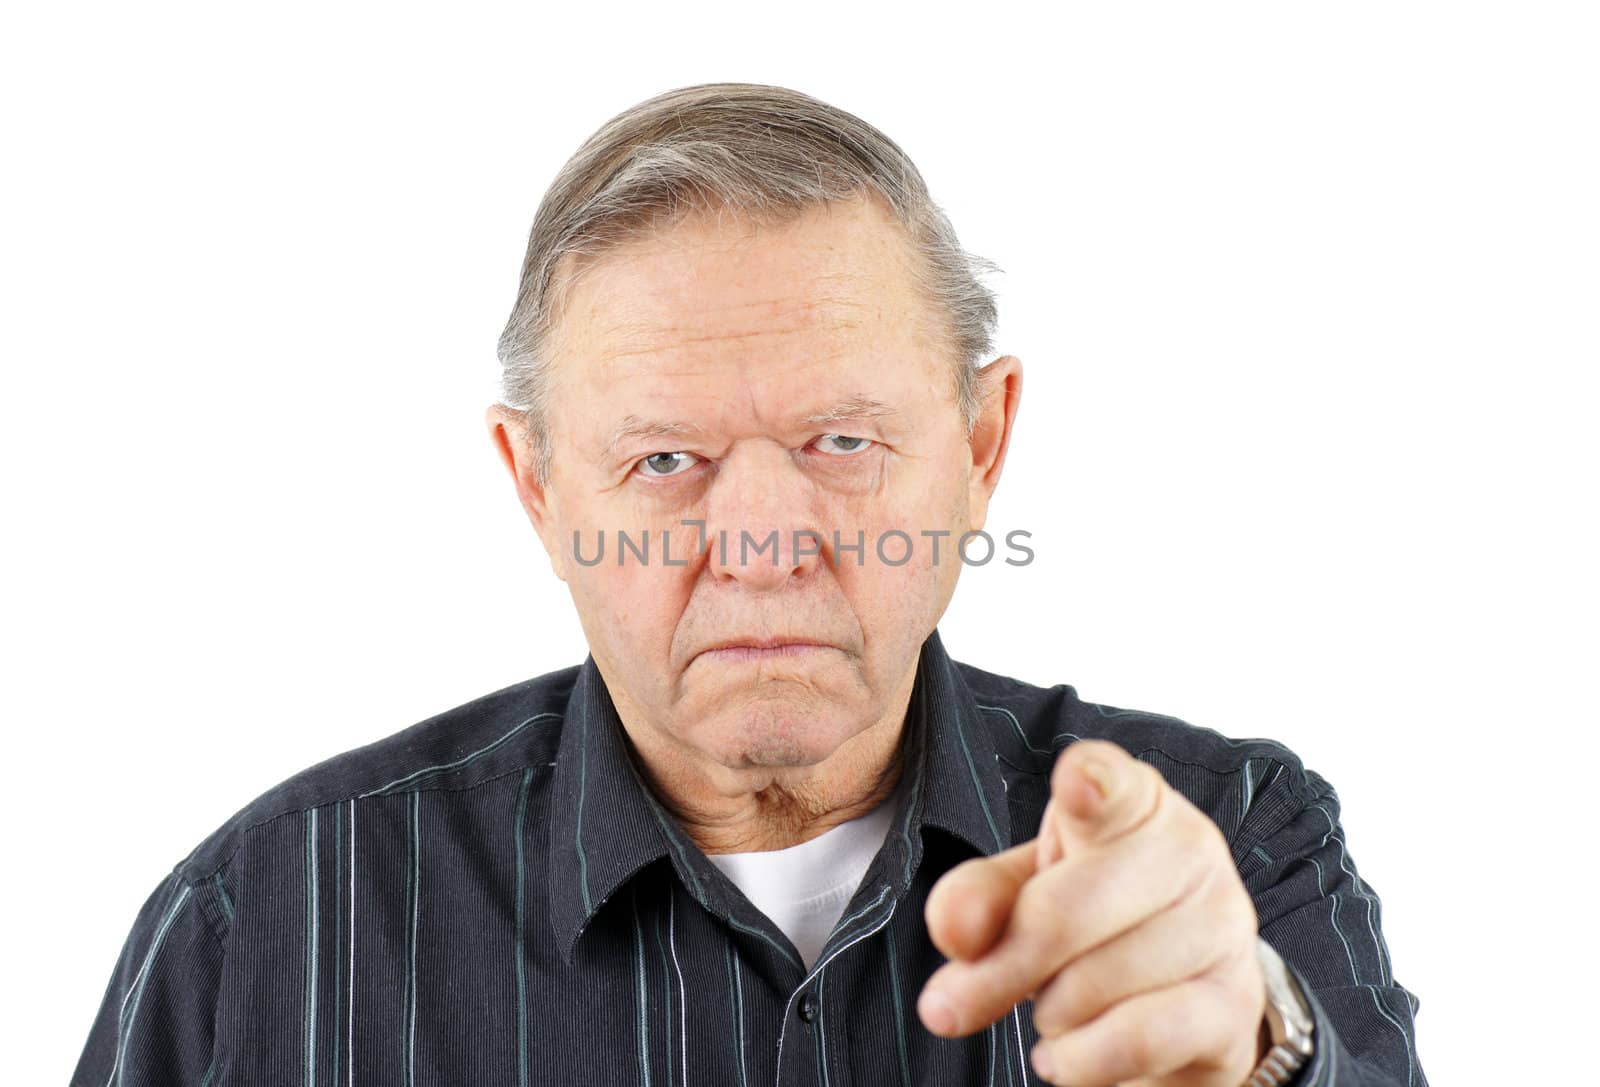 Grumpy angry senior or old man pointing his finger at the camera with a big frown on his face, blaming or warning you.